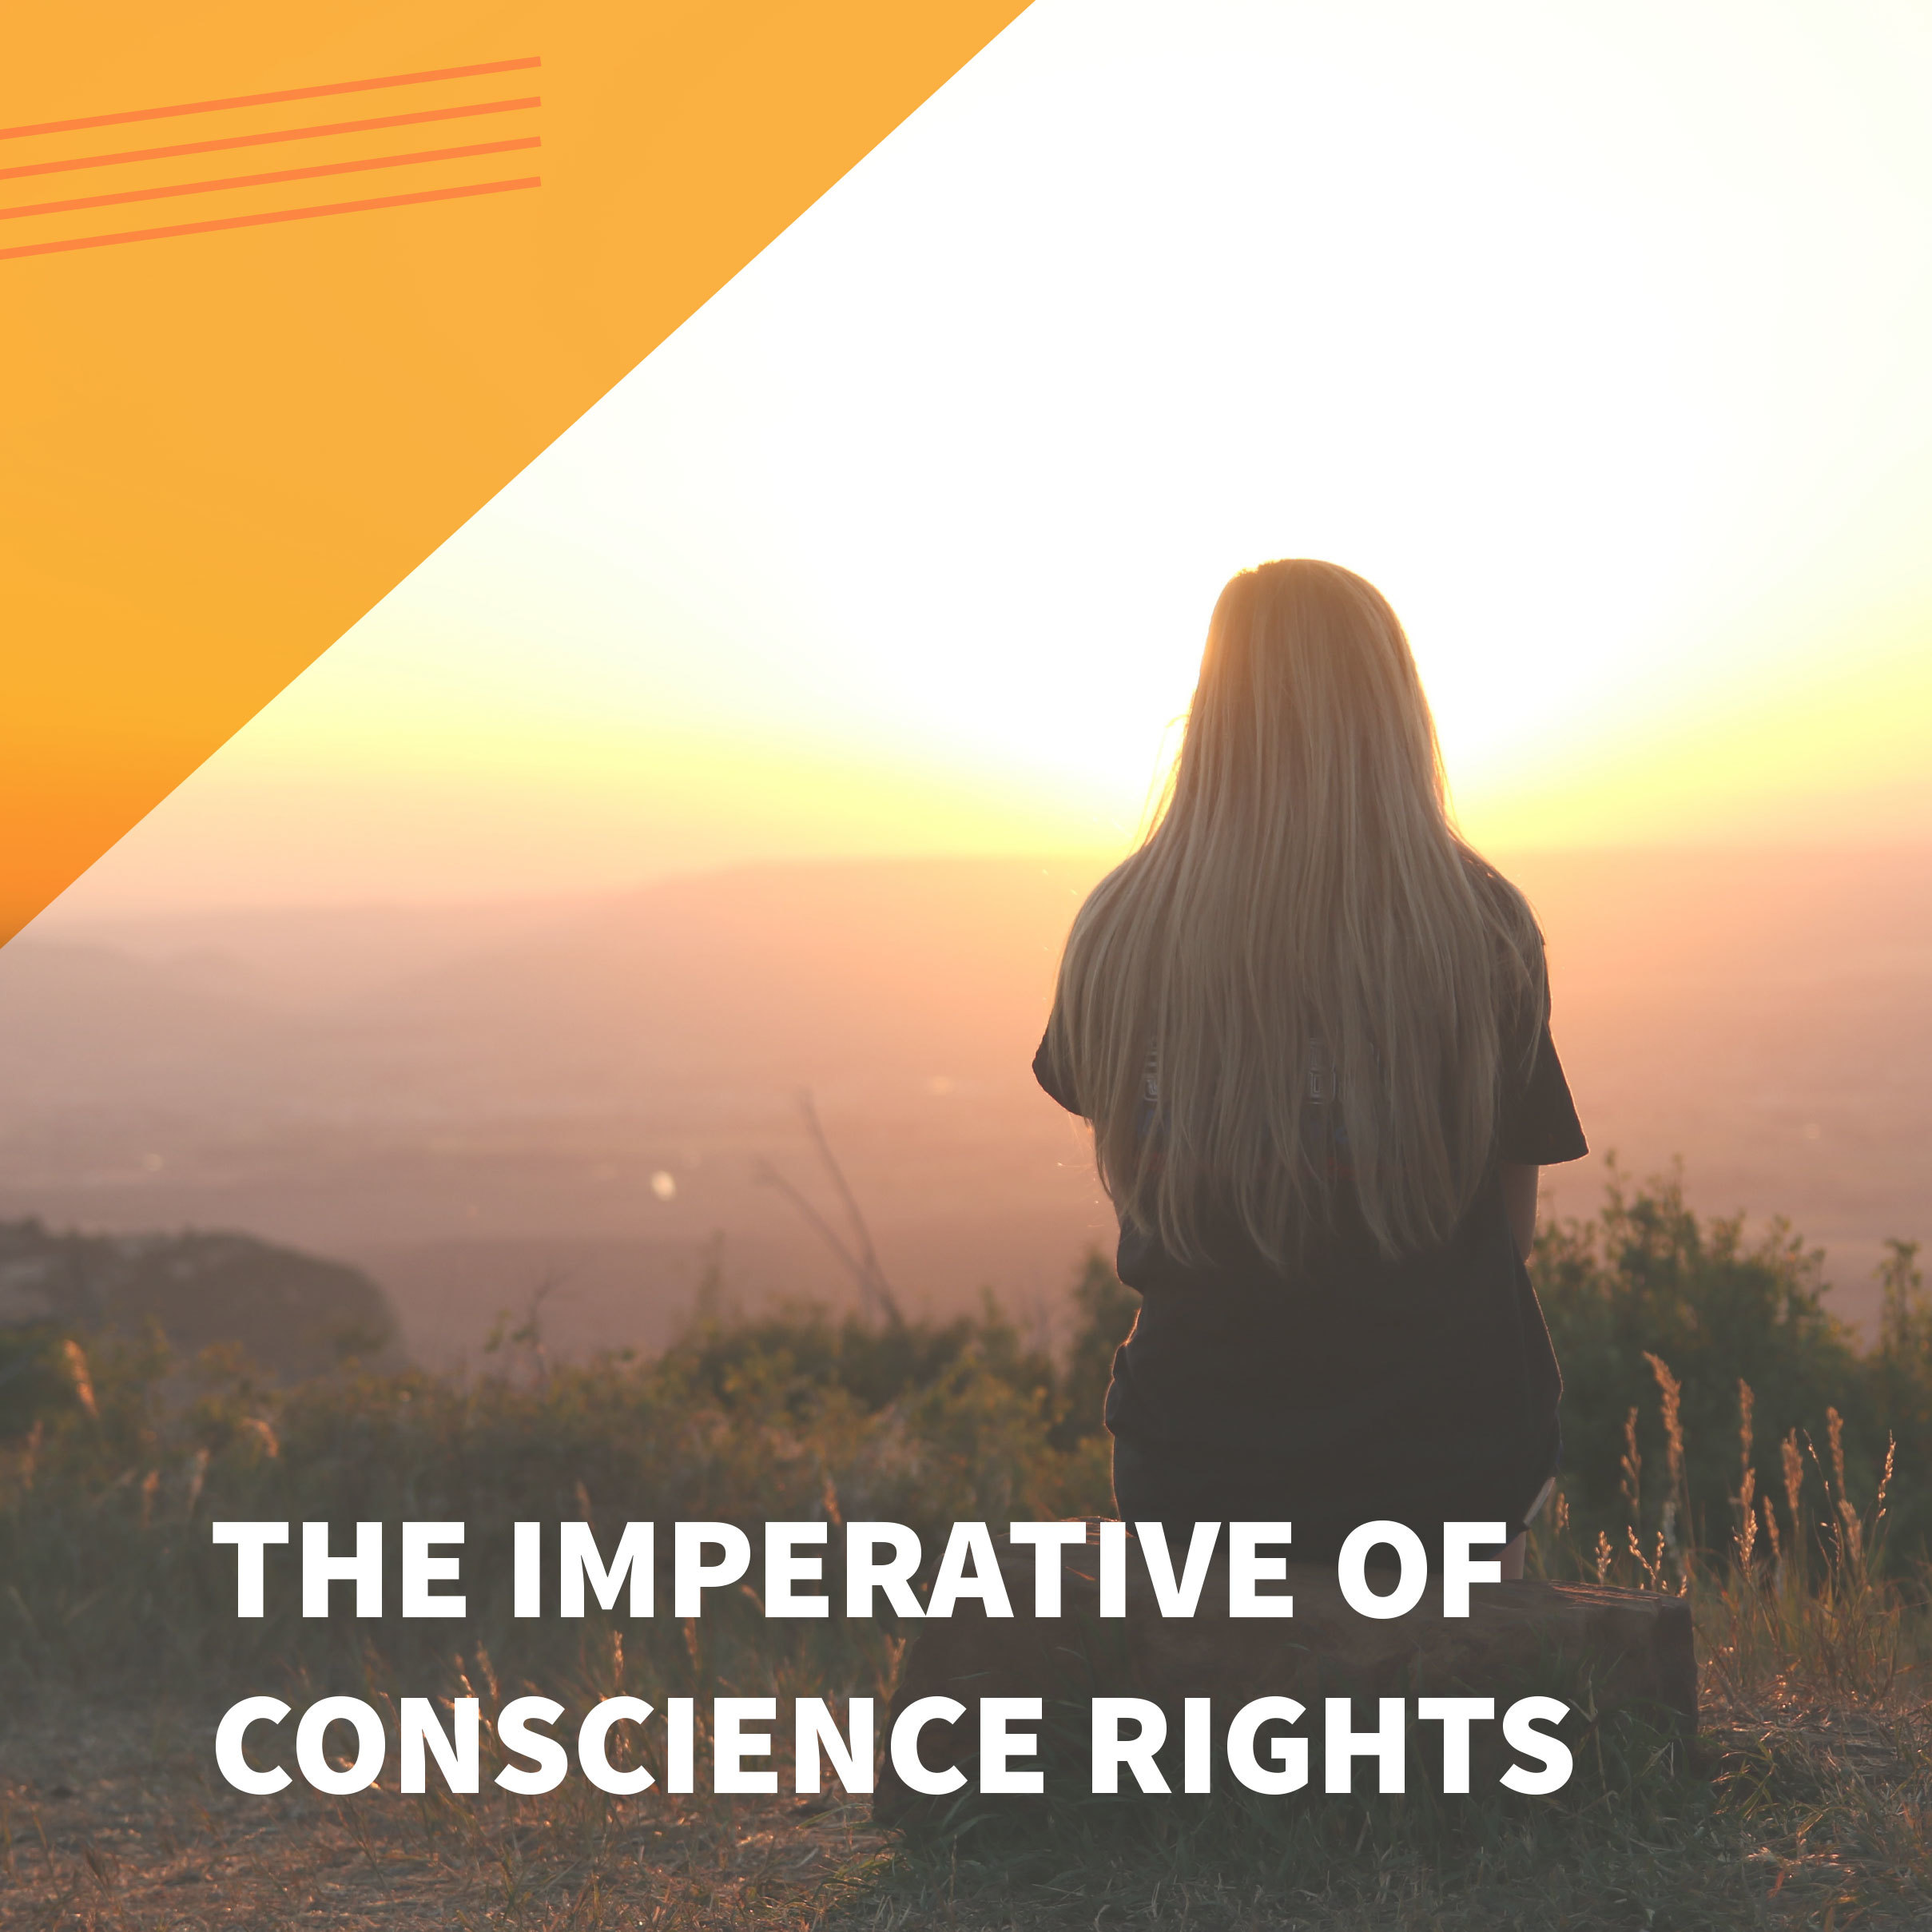 The Imperative of Conscience Rights